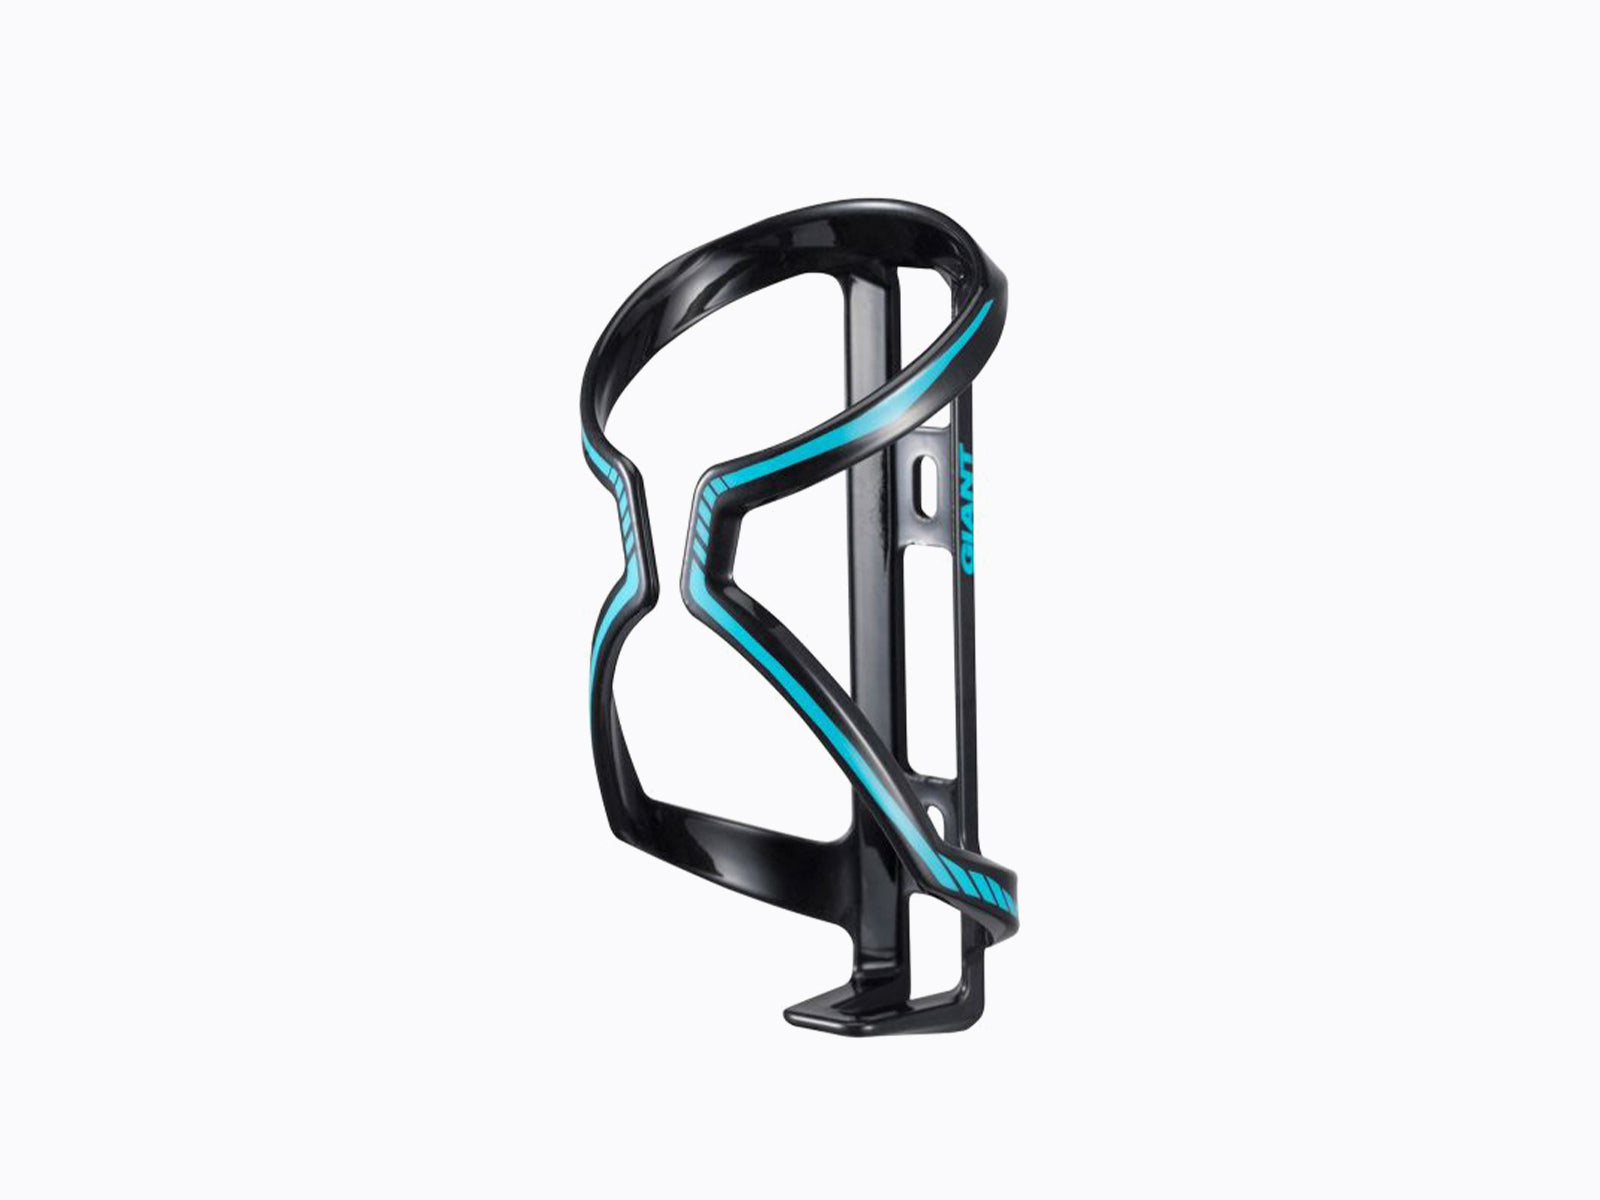 image features The Giant Airway Composite, a bottle holder for any type of bike you ride in colour aqua